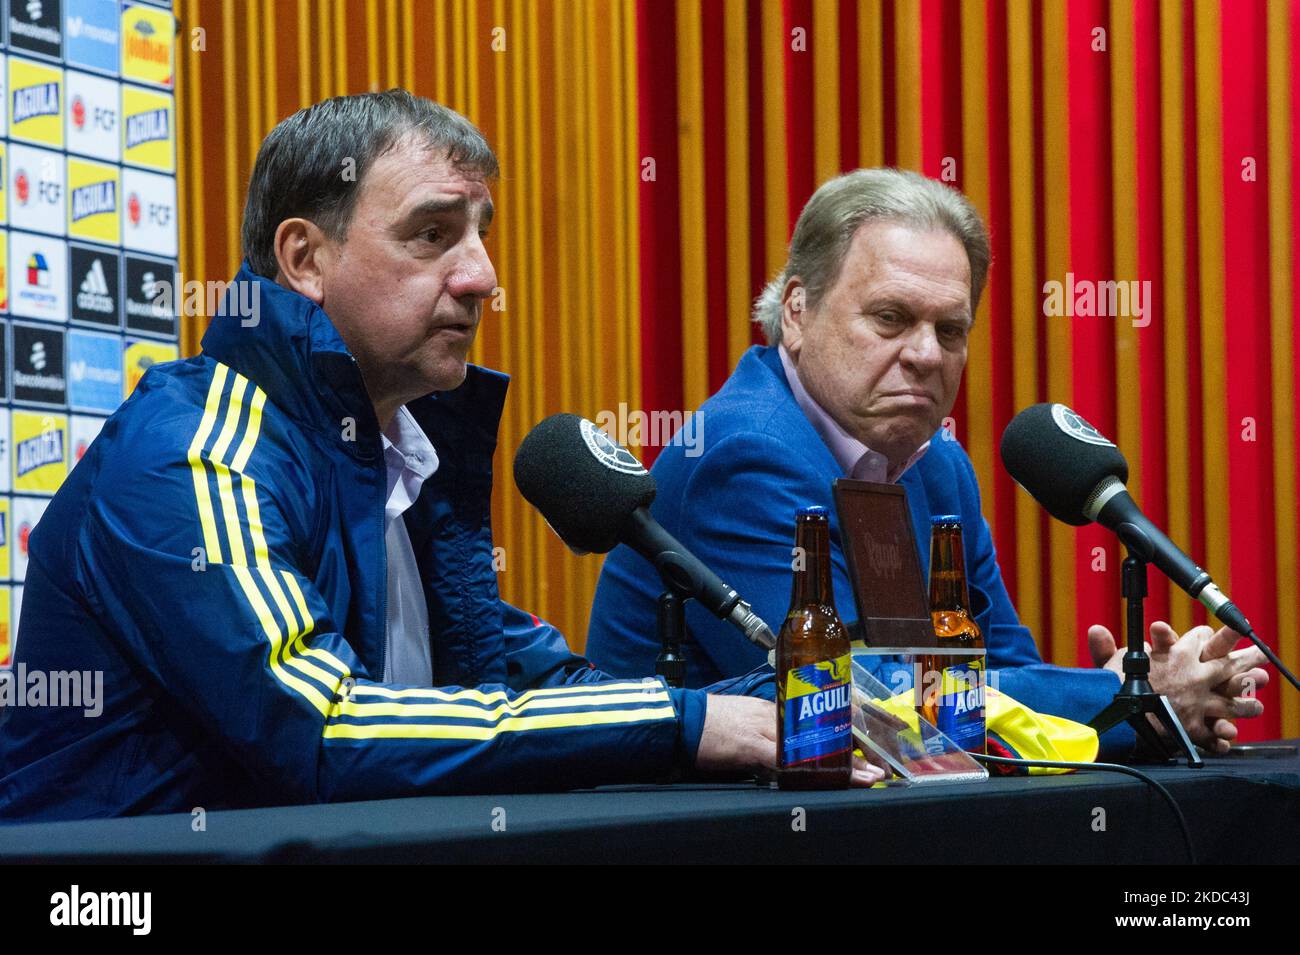 Colombia's federation of football soccer team unveils its new coach in replacement of Reinaldo Rueda in a press conference with new coach Nestor Lorenzo presented by Colombia's soccer team president Ramon Jesurun in Bogota, Colombia June 14, 2022. (Photo by Sebastian Barros/NurPhoto) Stock Photo